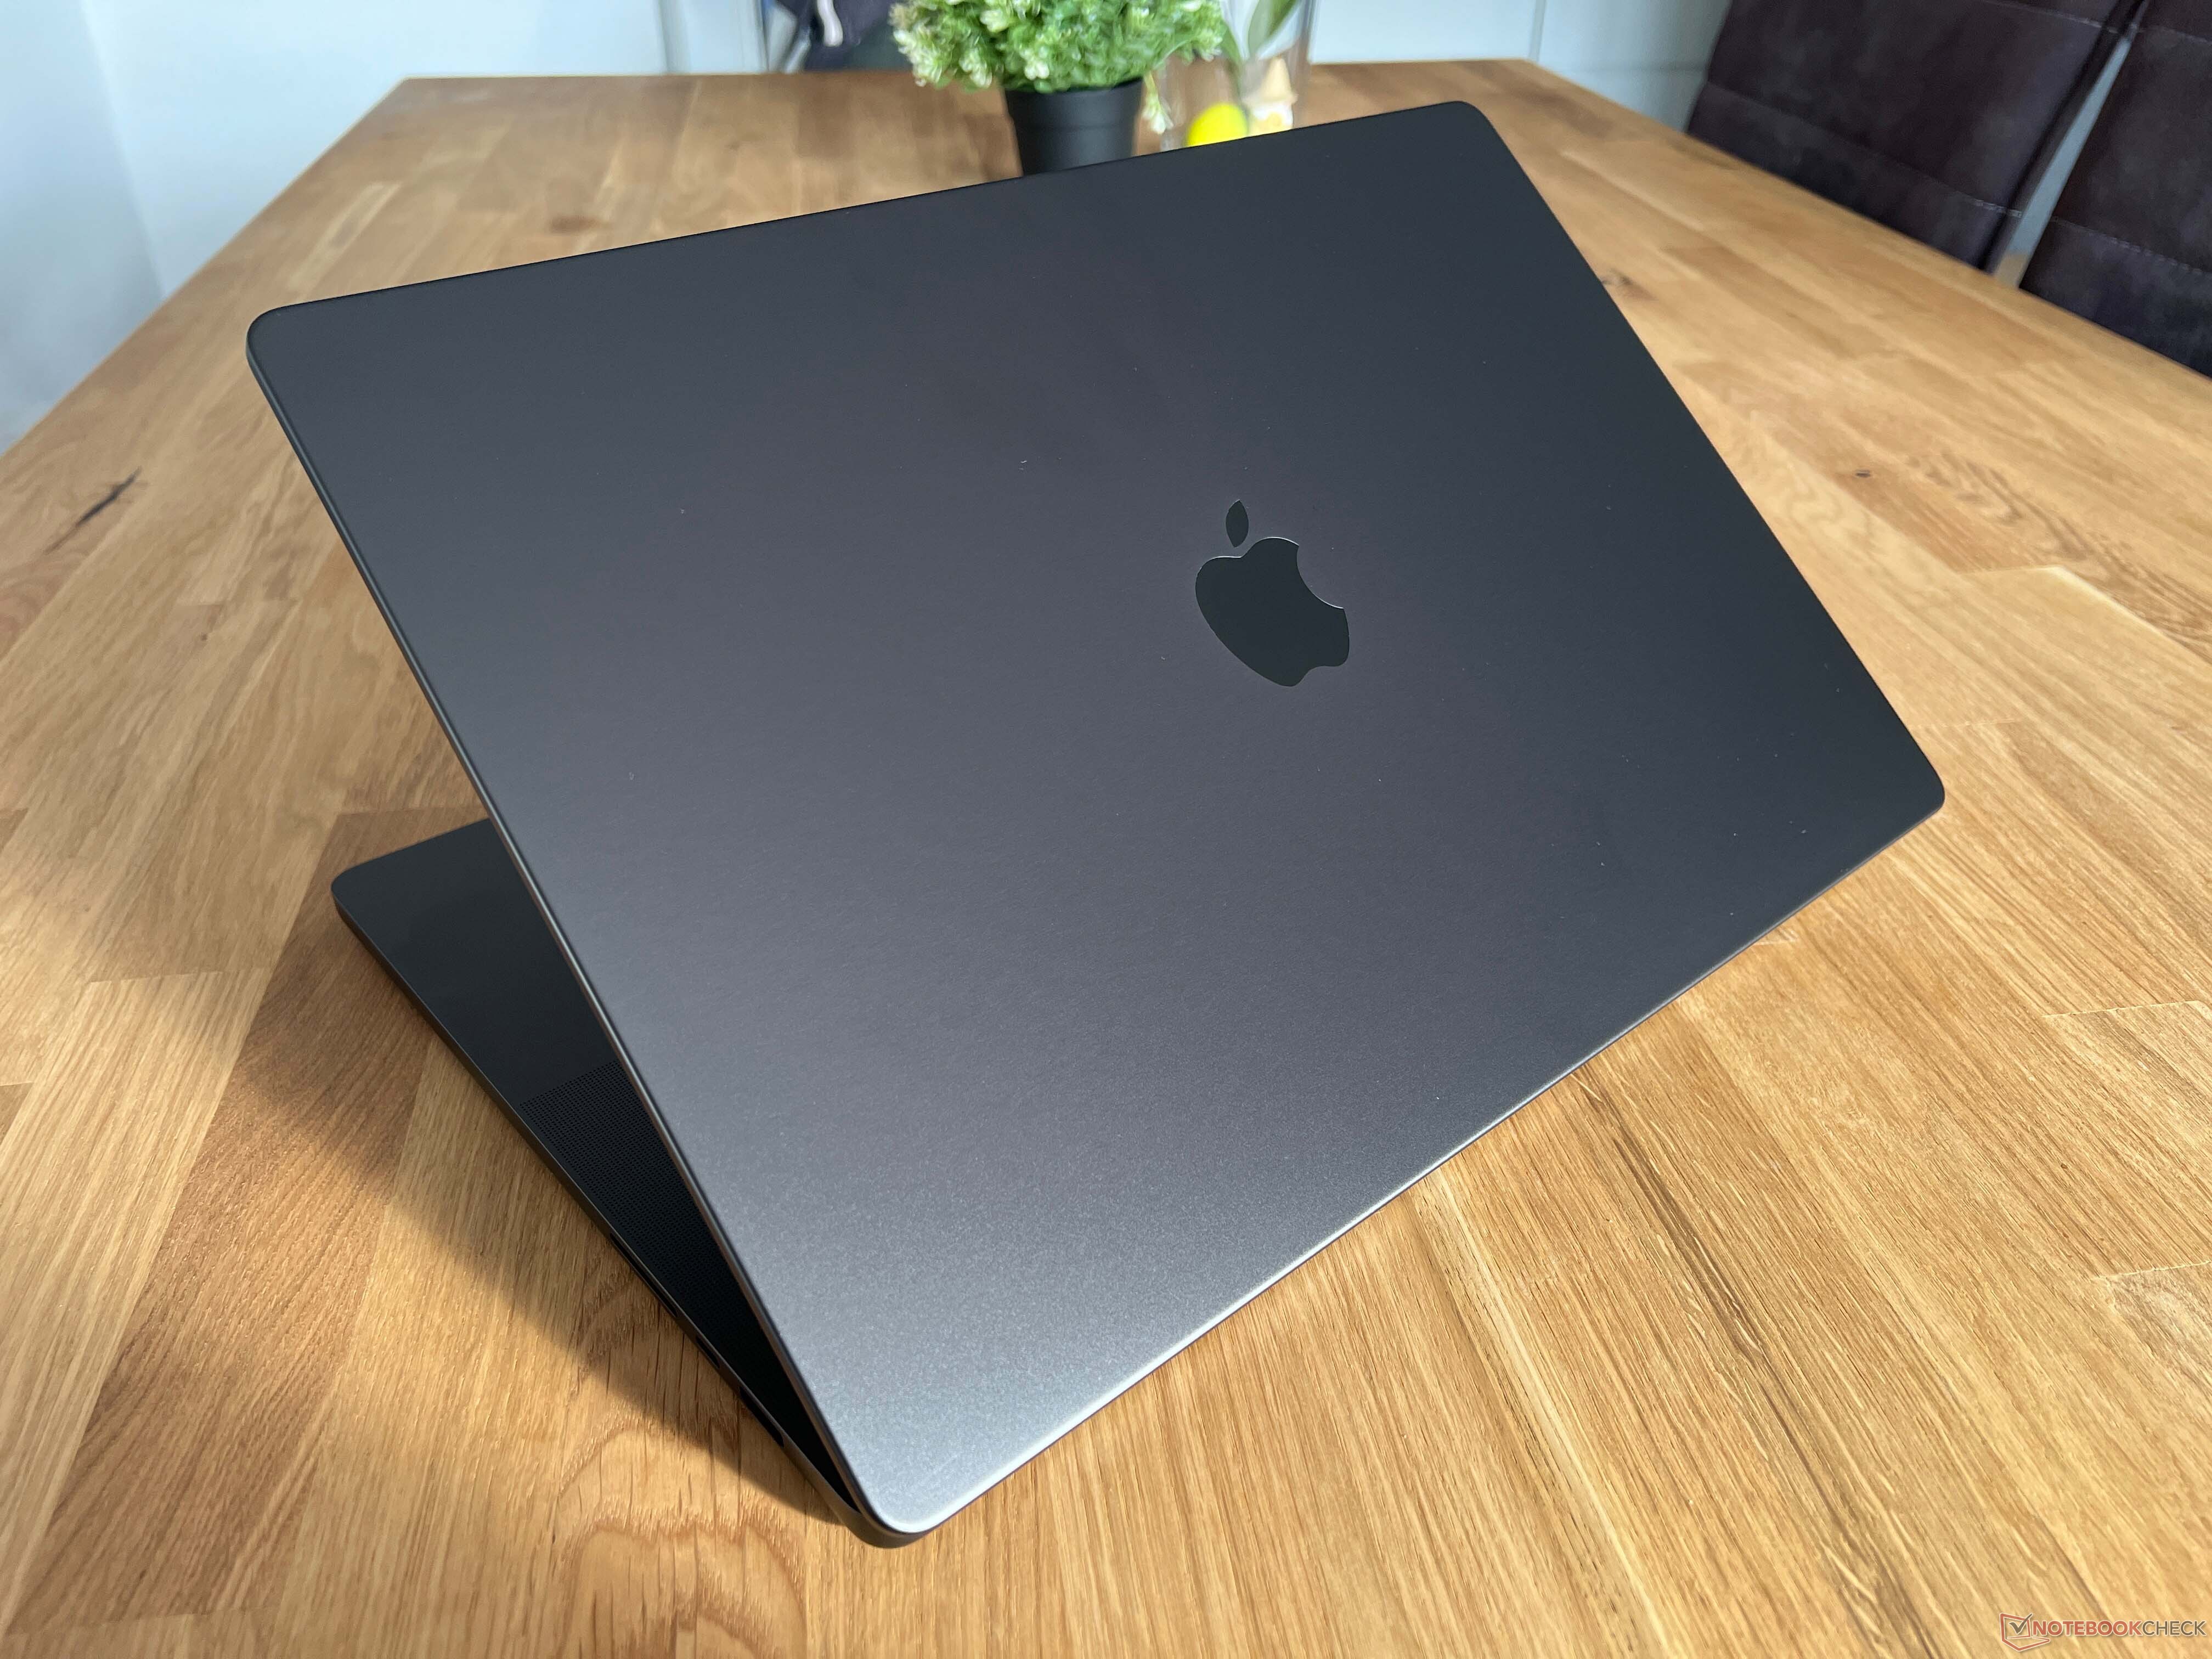 Apple MacBook Pro 16 2023 M3 Max Review - M3 Max challenges HX-CPUs from  AMD & Intel -  Reviews